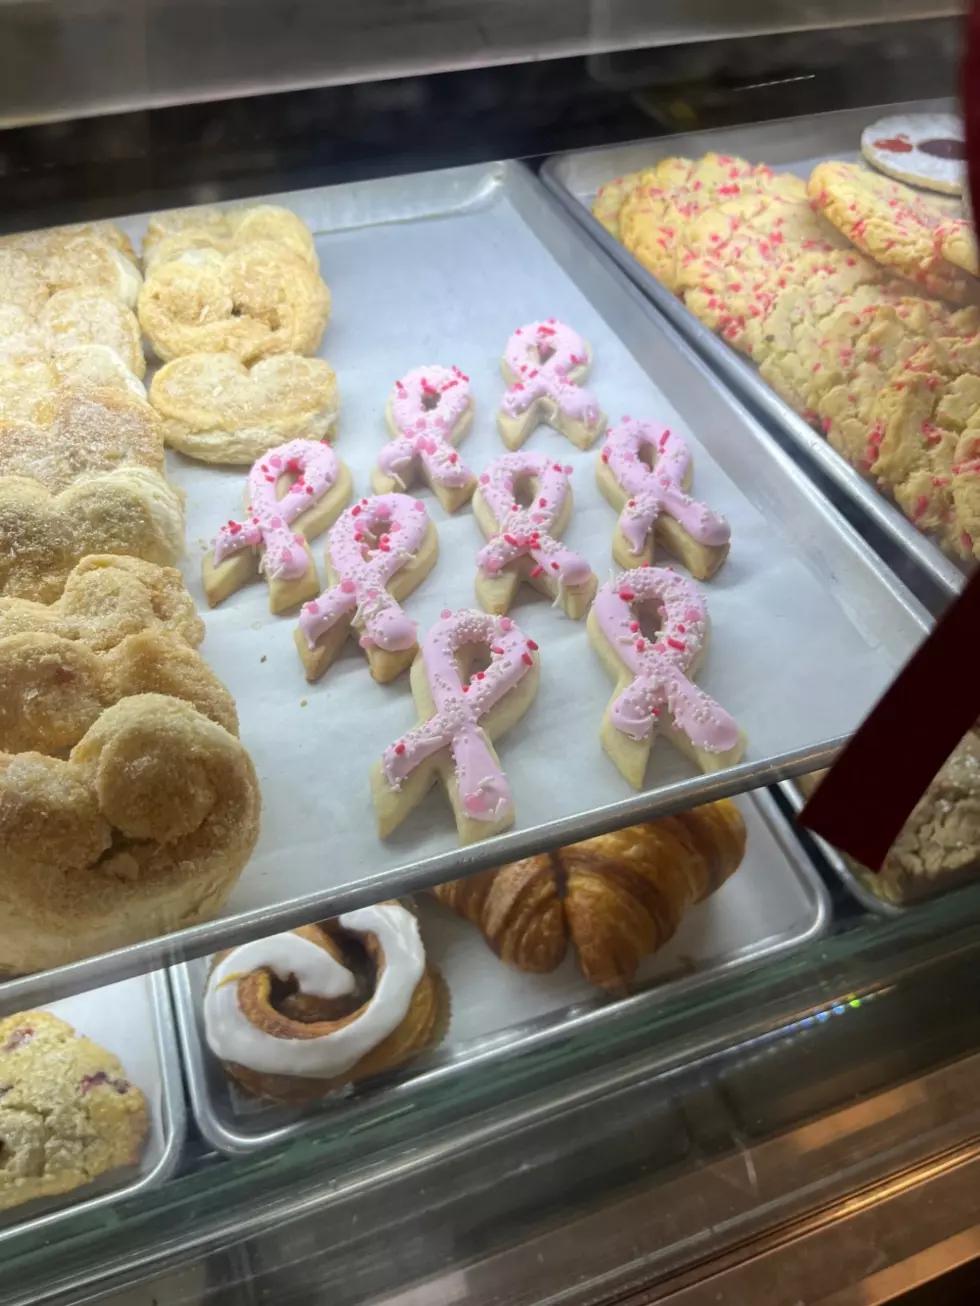 Go to This Hamilton, NJ Bakery For Pink Sweet Treats to Help Fight Breast Cancer